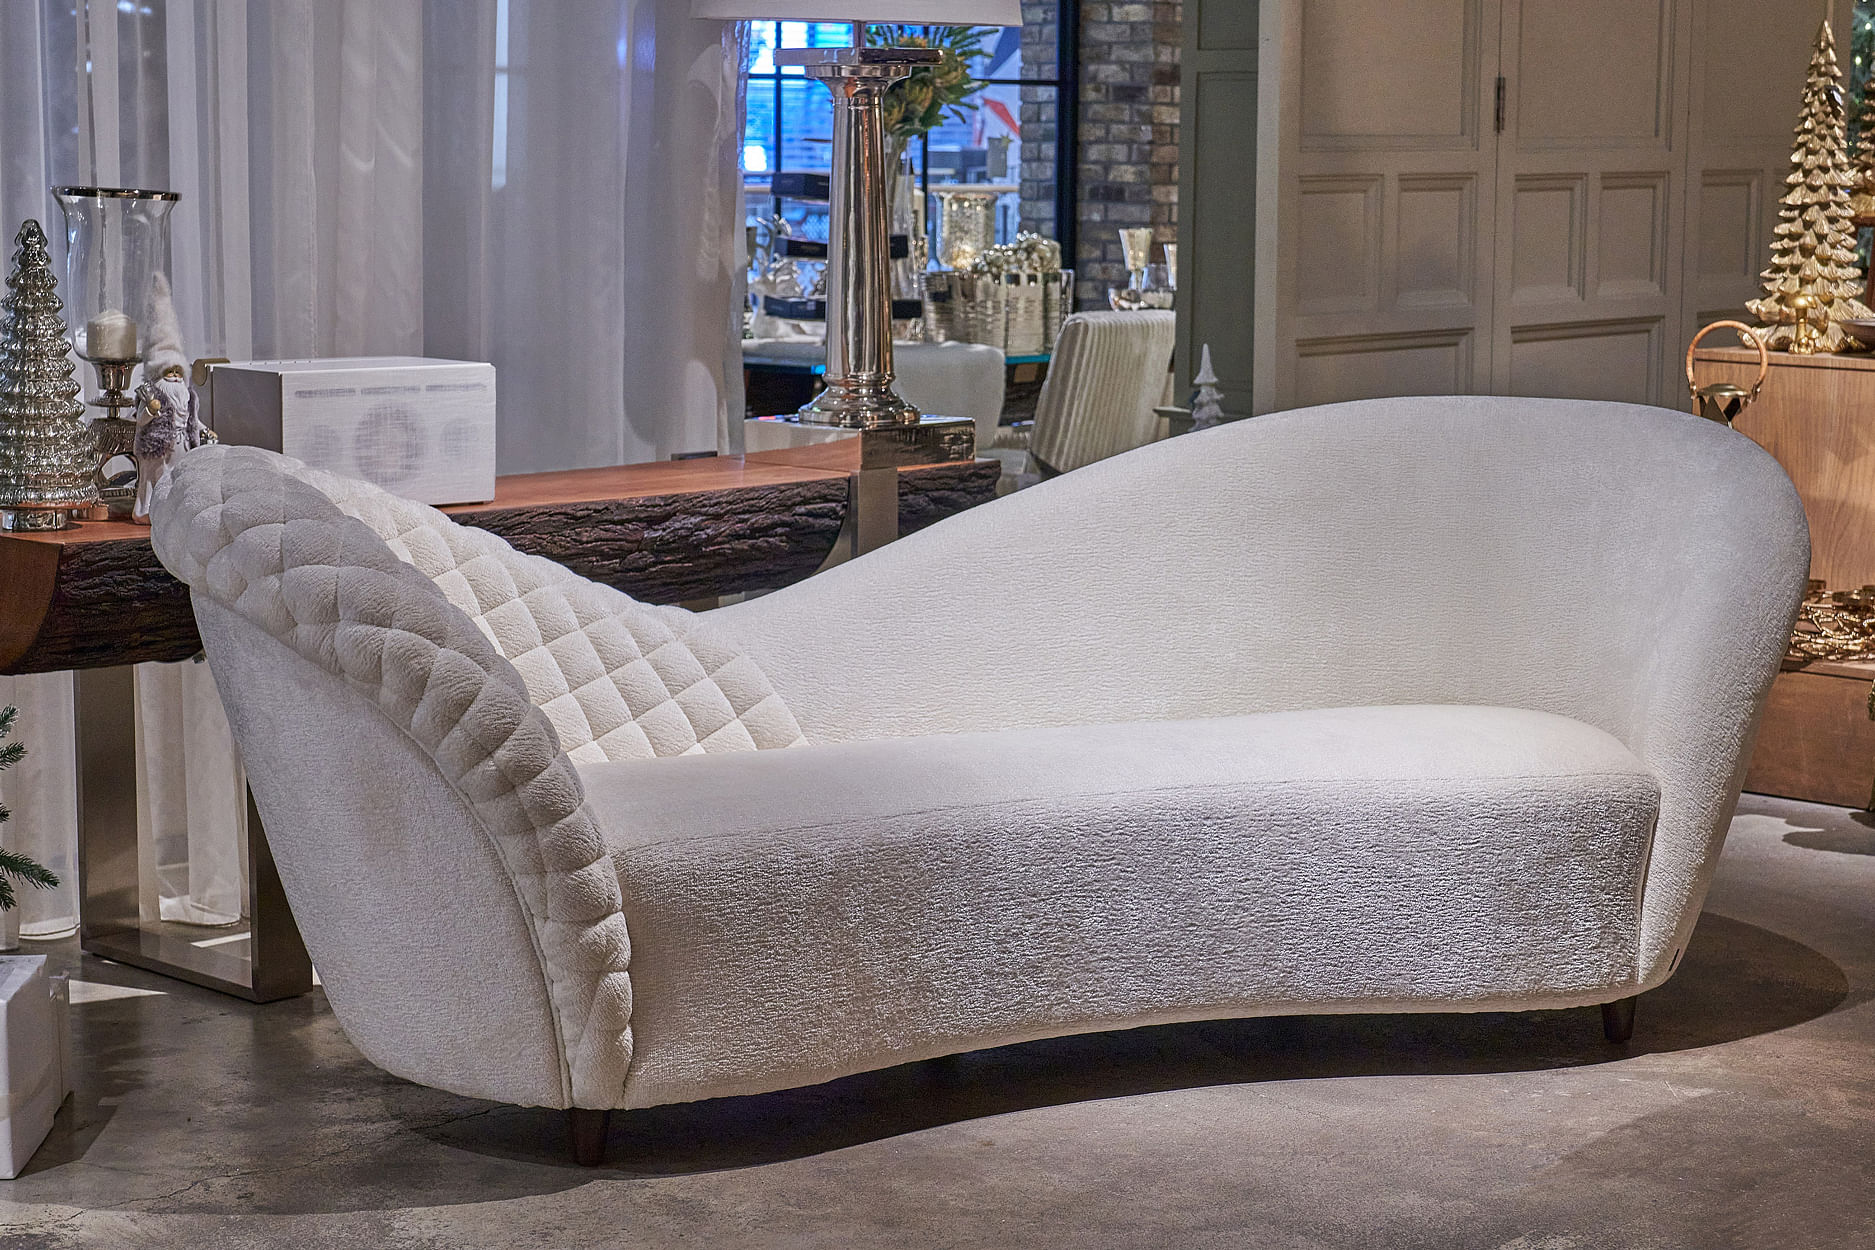 A quilted pearl-hued chaise longue sits in front of a console.